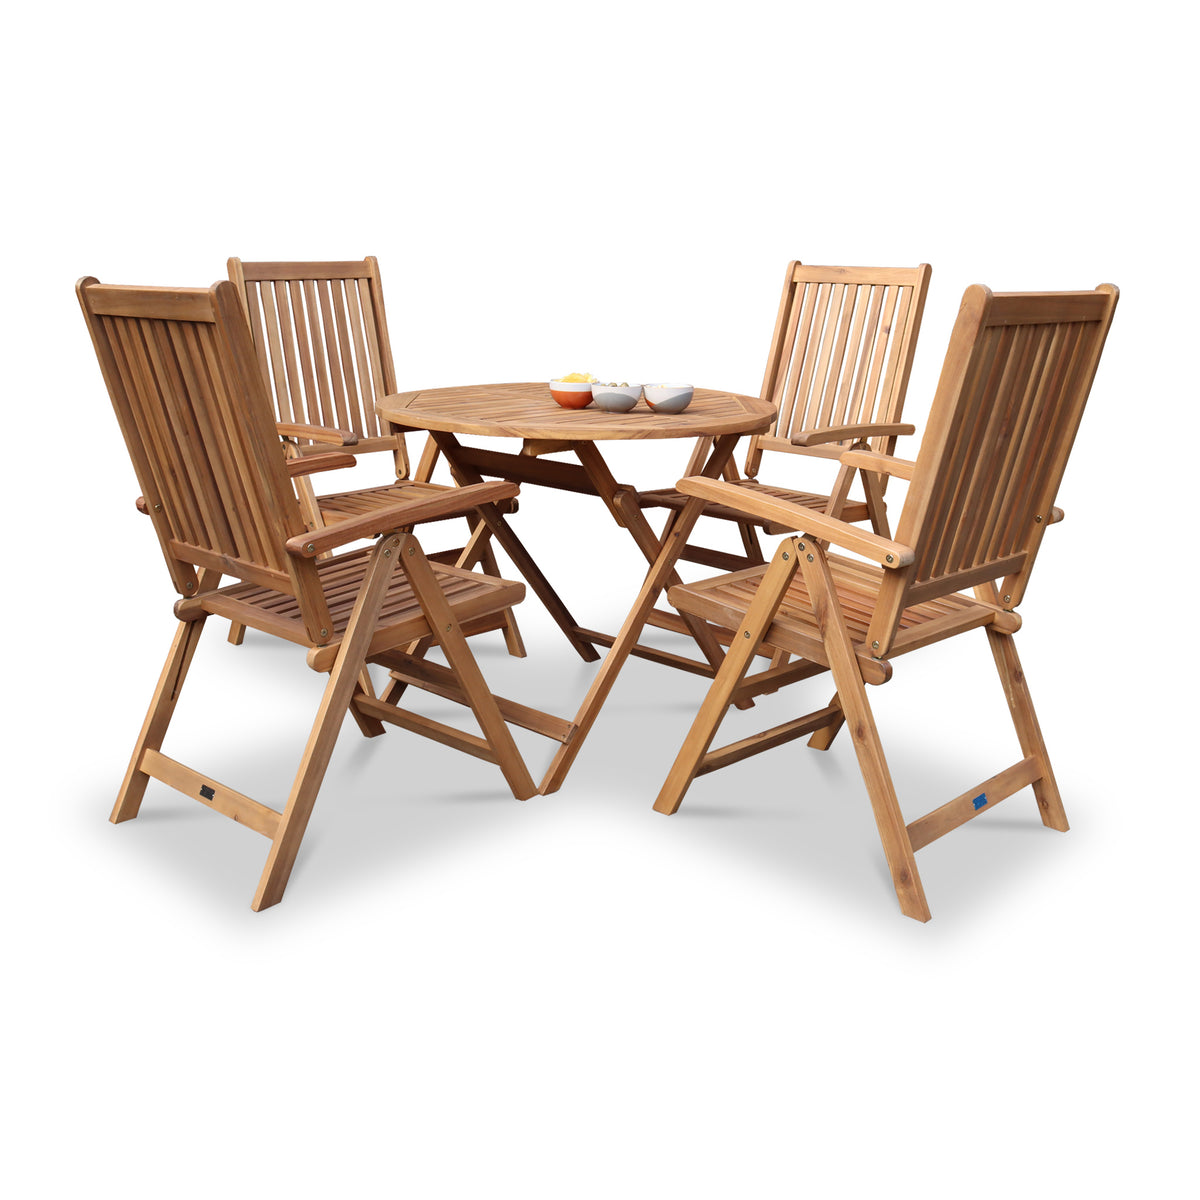 Brooklyn FSC Folding Set with 4 Manhattan Recliner Chairs from Roseland Furniture